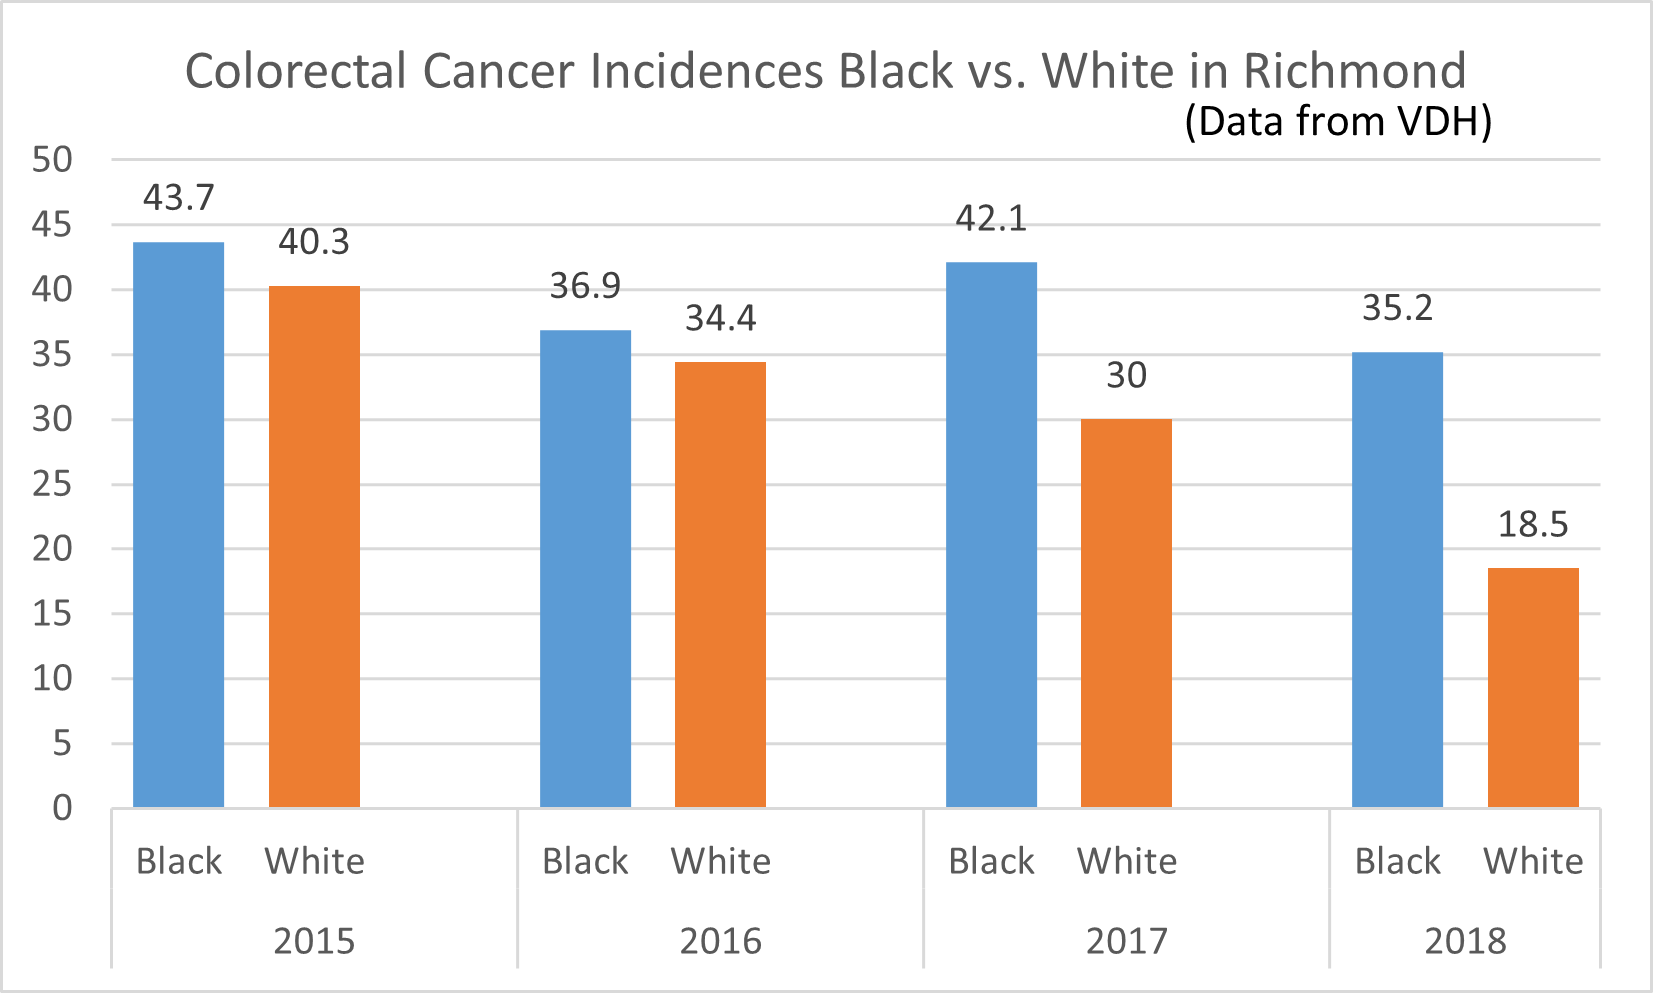 Bar graph showing that from 2015-2019 Blacks had higher incidence rates of colorectal cancer than Whites (43.7 vs. 40.3 in 2015; 36.9 vs. 34.4 in 2016; 42.1 vs. 30 in 2017; 35.2 vs. 18.5 in 2018)